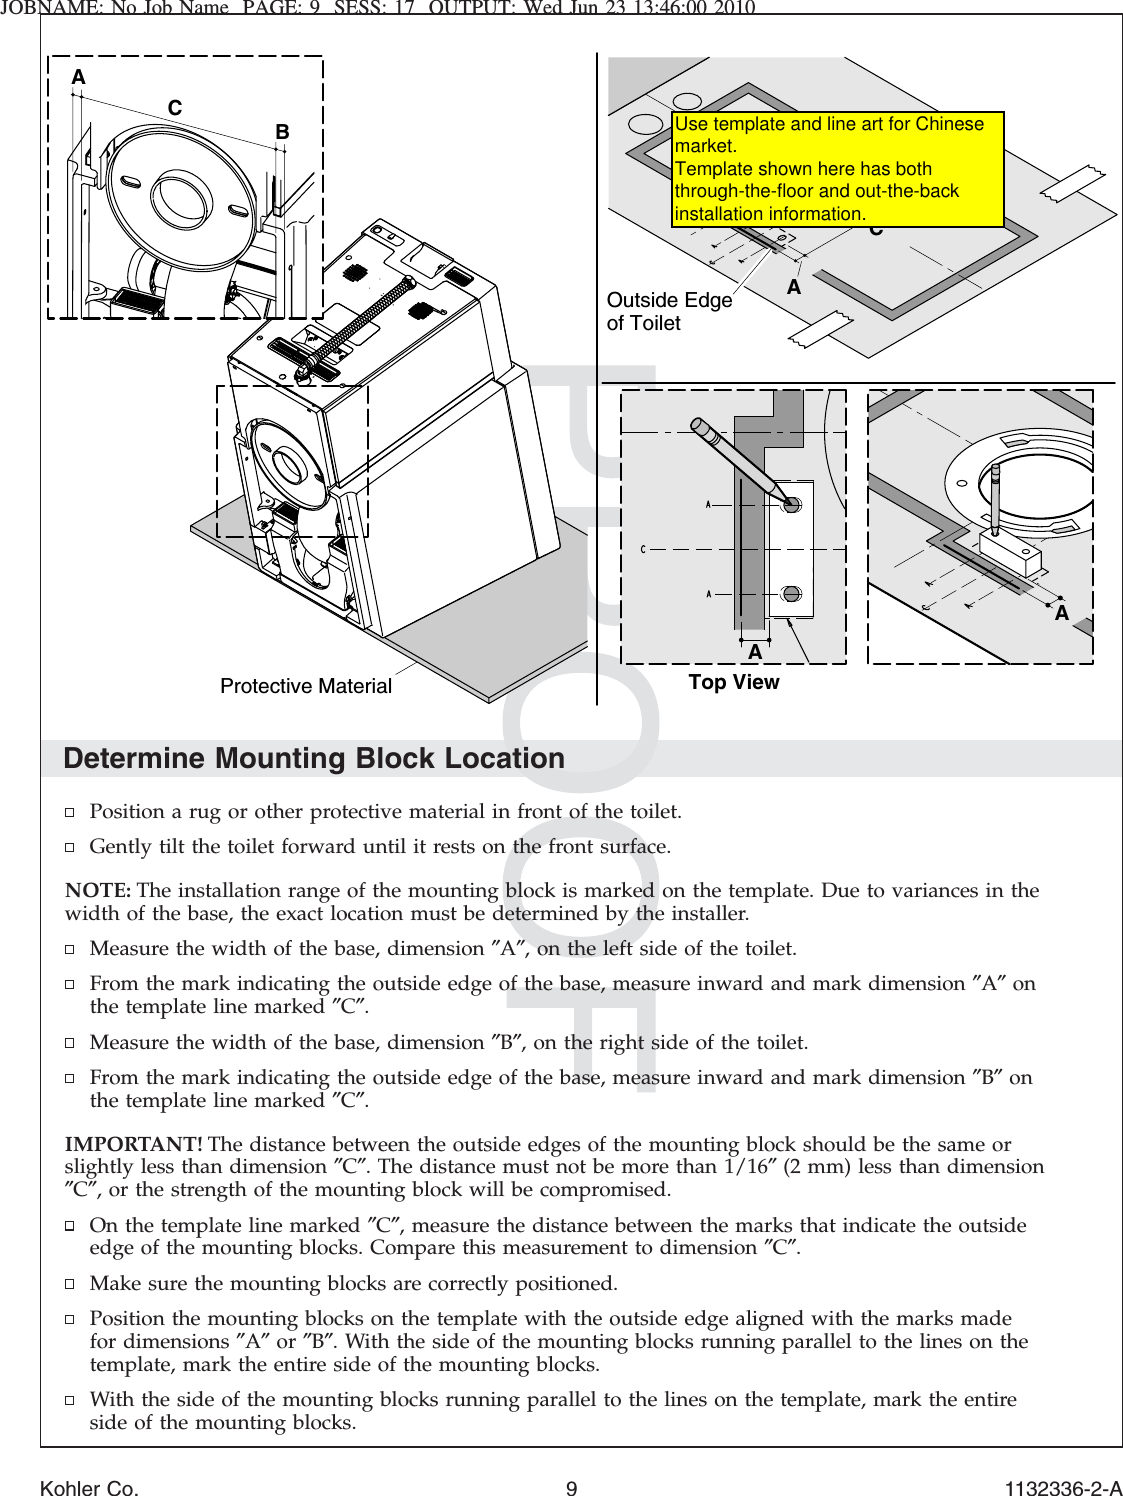 JOBNAME: No Job Name PAGE: 9 SESS: 17 OUTPUT: Wed Jun 23 13:46:00 2010Determine Mounting Block LocationPosition a rug or other protective material in front of the toilet.Gently tilt the toilet forward until it rests on the front surface.NOTE: The installation range of the mounting block is marked on the template. Due to variances in thewidth of the base, the exact location must be determined by the installer.Measure the width of the base, dimension ″A″, on the left side of the toilet.From the mark indicating the outside edge of the base, measure inward and mark dimension ″A″onthe template line marked ″C″.Measure the width of the base, dimension ″B″, on the right side of the toilet.From the mark indicating the outside edge of the base, measure inward and mark dimension ″B″onthe template line marked ″C″.IMPORTANT! The distance between the outside edges of the mounting block should be the same orslightly less than dimension ″C″. The distance must not be more than 1/16″(2 mm) less than dimension″C″, or the strength of the mounting block will be compromised.On the template line marked ″C″, measure the distance between the marks that indicate the outsideedge of the mounting blocks. Compare this measurement to dimension ″C″.Make sure the mounting blocks are correctly positioned.Position the mounting blocks on the template with the outside edge aligned with the marks madefor dimensions ″A″or ″B″. With the side of the mounting blocks running parallel to the lines on thetemplate, mark the entire side of the mounting blocks.With the side of the mounting blocks running parallel to the lines on the template, mark the entireside of the mounting blocks.ABCOutside Edge of ToiletAATop ViewProtective MaterialABCKohler Co. 9 1132336-2-AUse template and line art for Chinese market. Template shown here has both through-the-floor and out-the-back installation information.